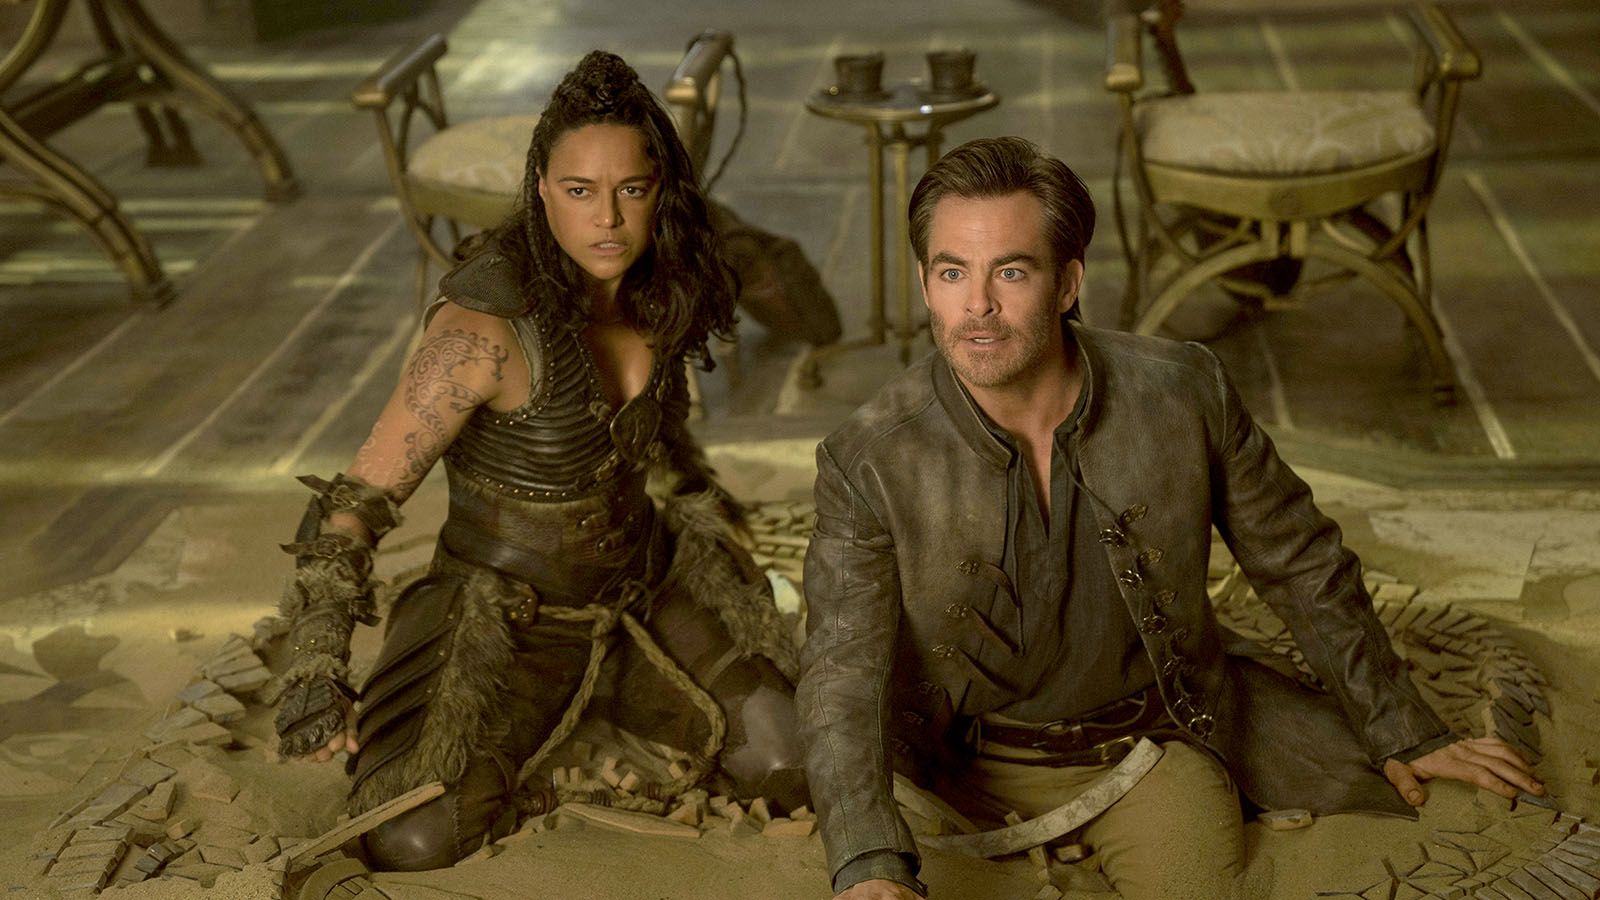 Michelle Rodriguez and Chris Pine star in Dungeons & Dragons: Honor Among Thieves.